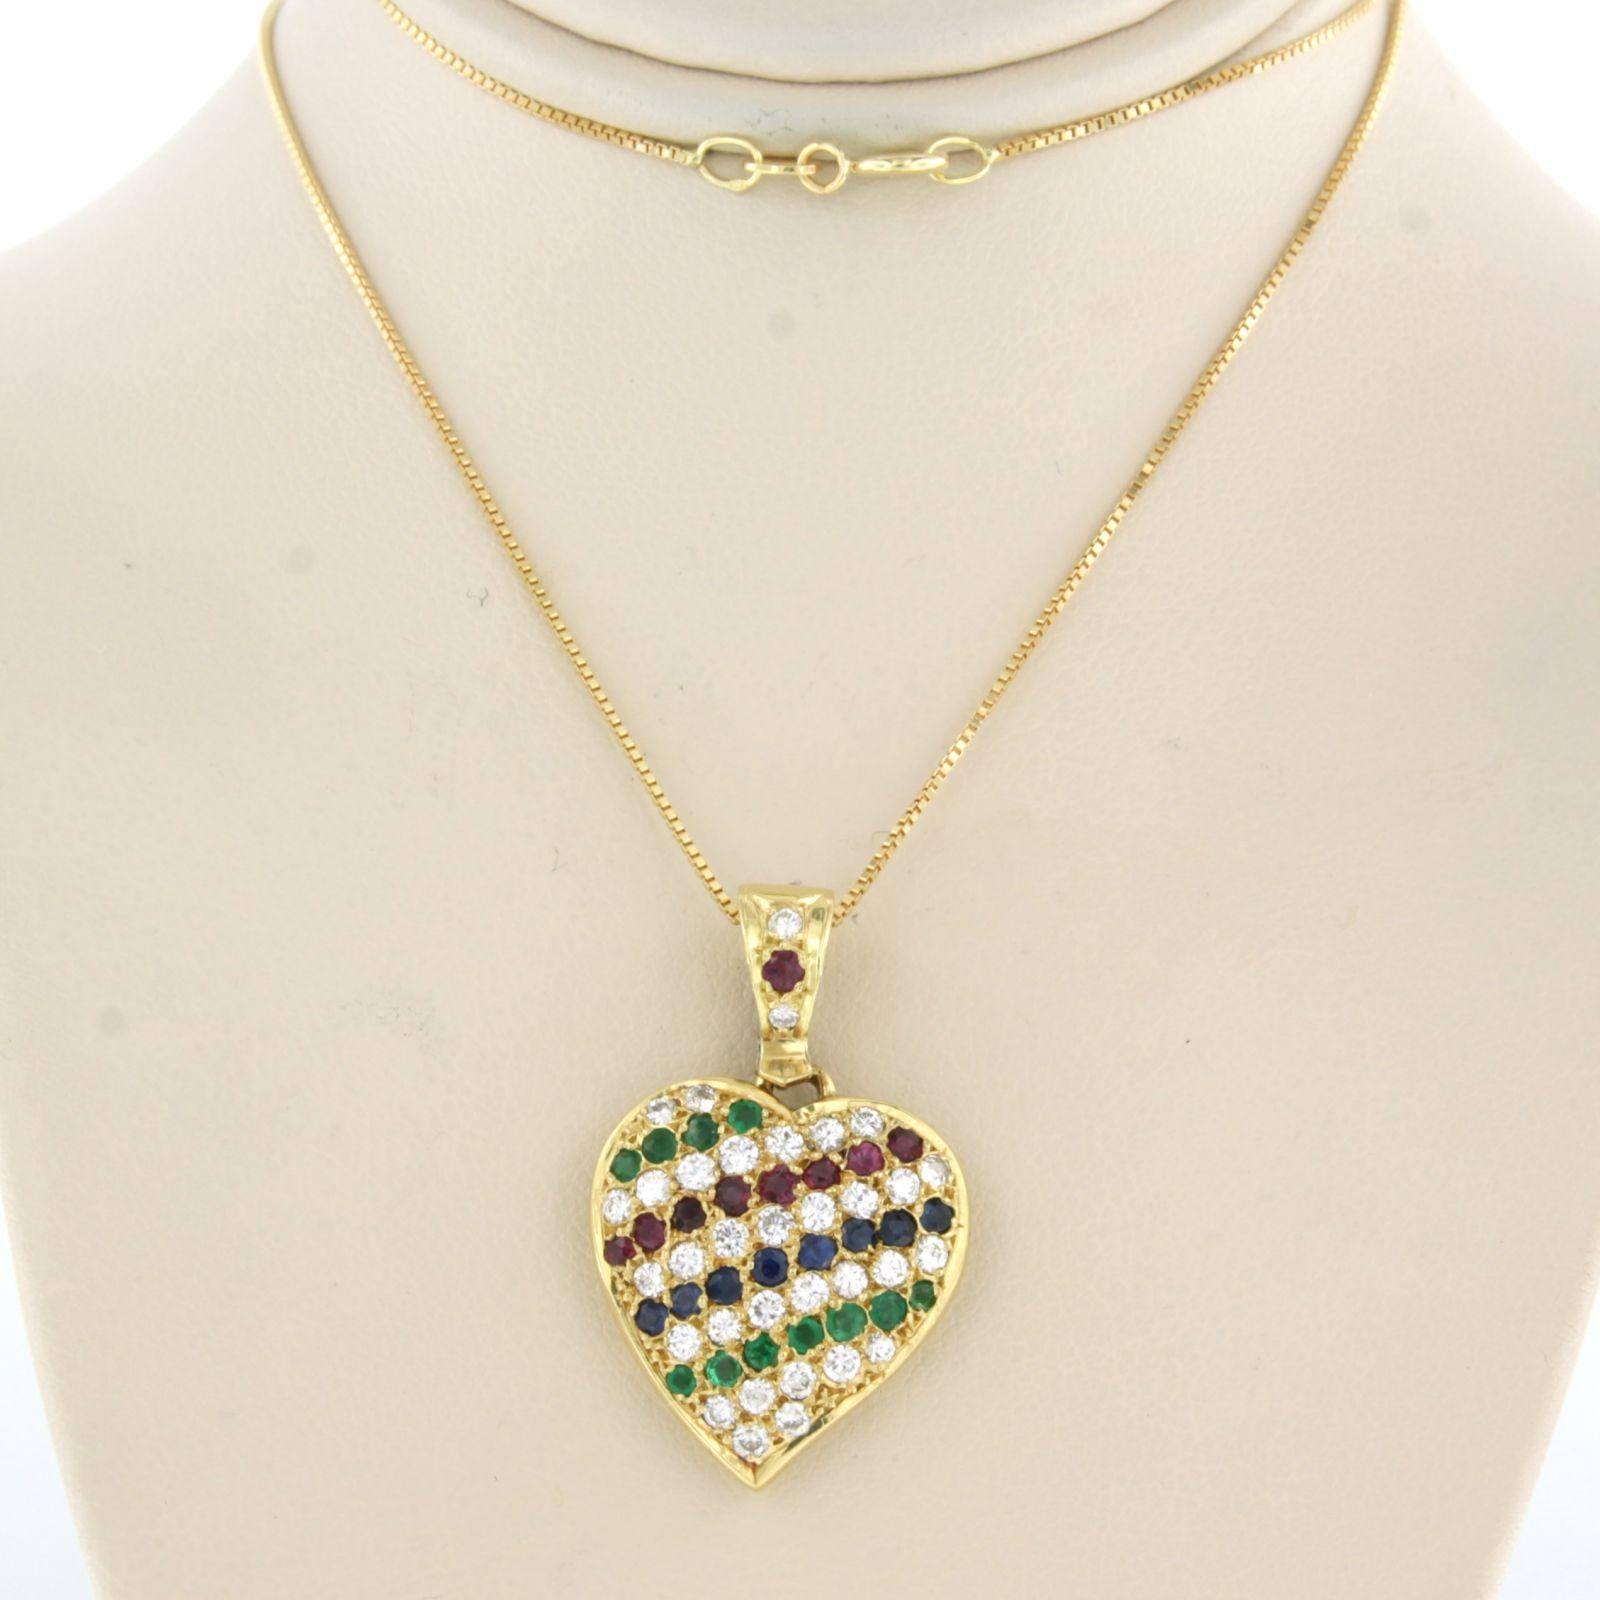 18 kt yellow gold necklace with a heart-shaped pendant set with sapphire, emerald, ruby ​​and brilliant cut diamond. 0.85 ct - F/G - VS/SI - 42 cm long

detailed description:

the necklace is 42 cm long and 0.8 mm wide

the pendant is 2.8 cm high